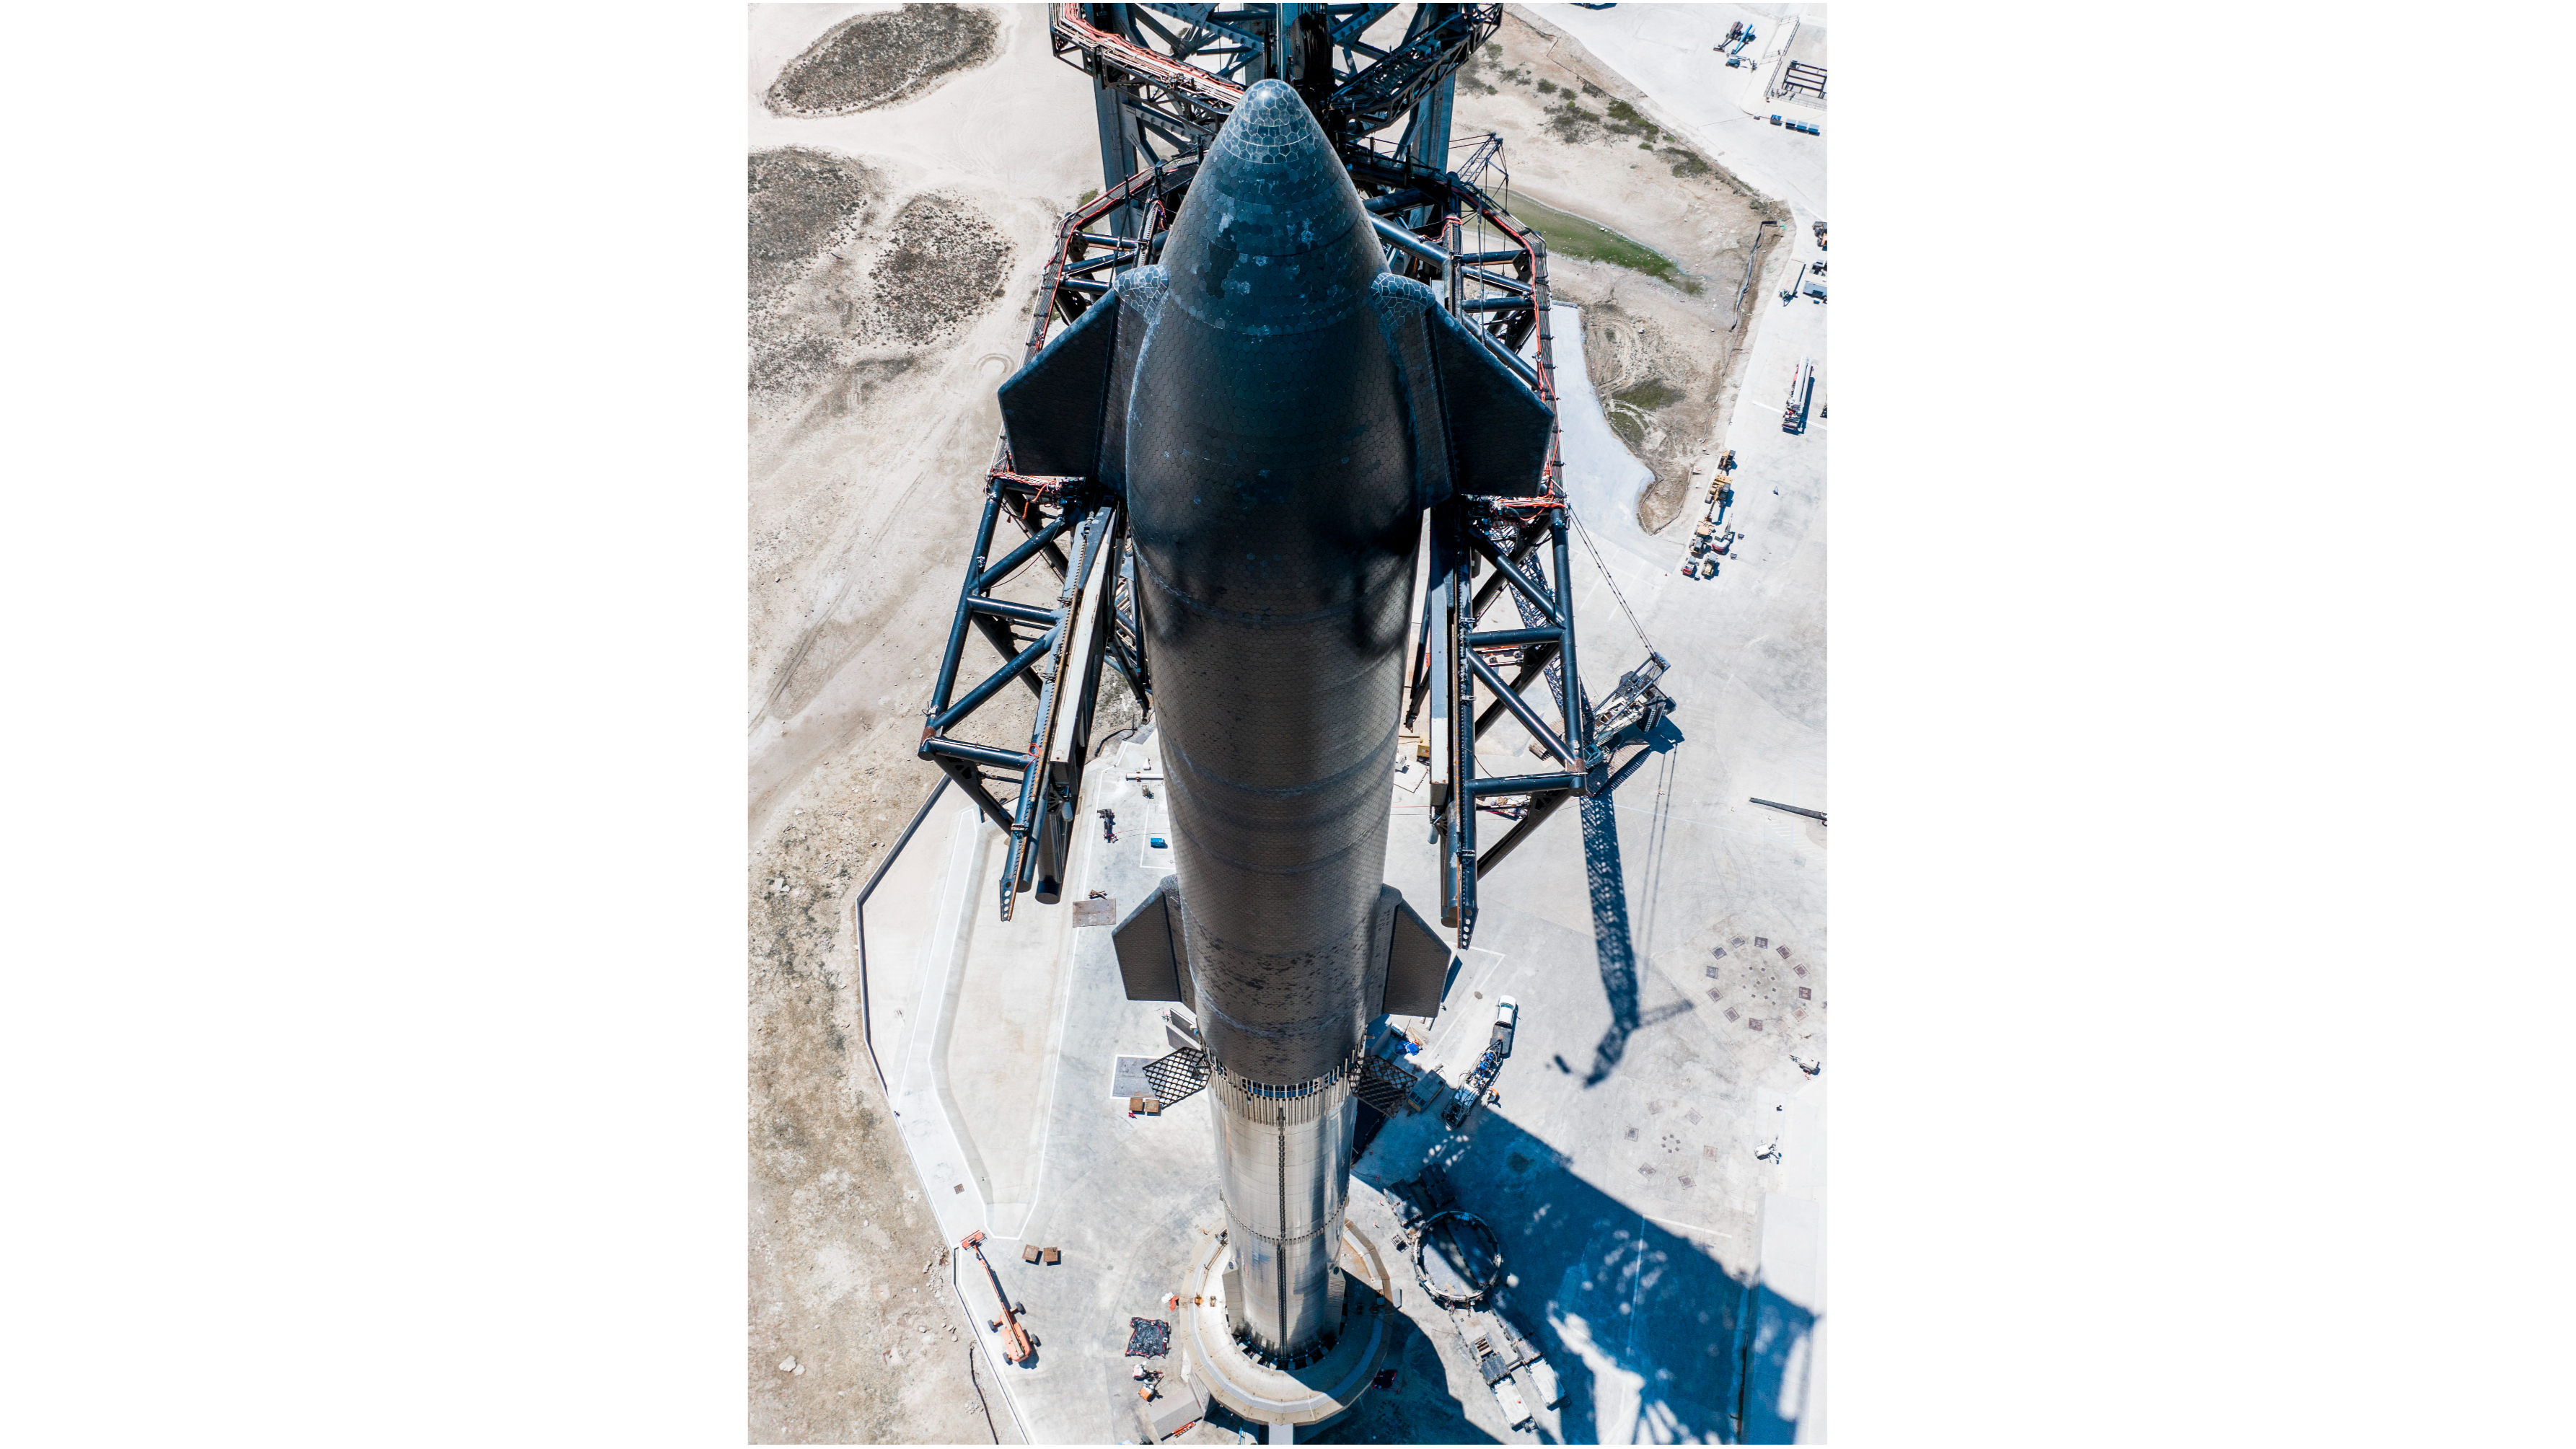 A bird's-eye view of SpaceX's massive spacecraft on the launch pad, with sand dunes in the background.